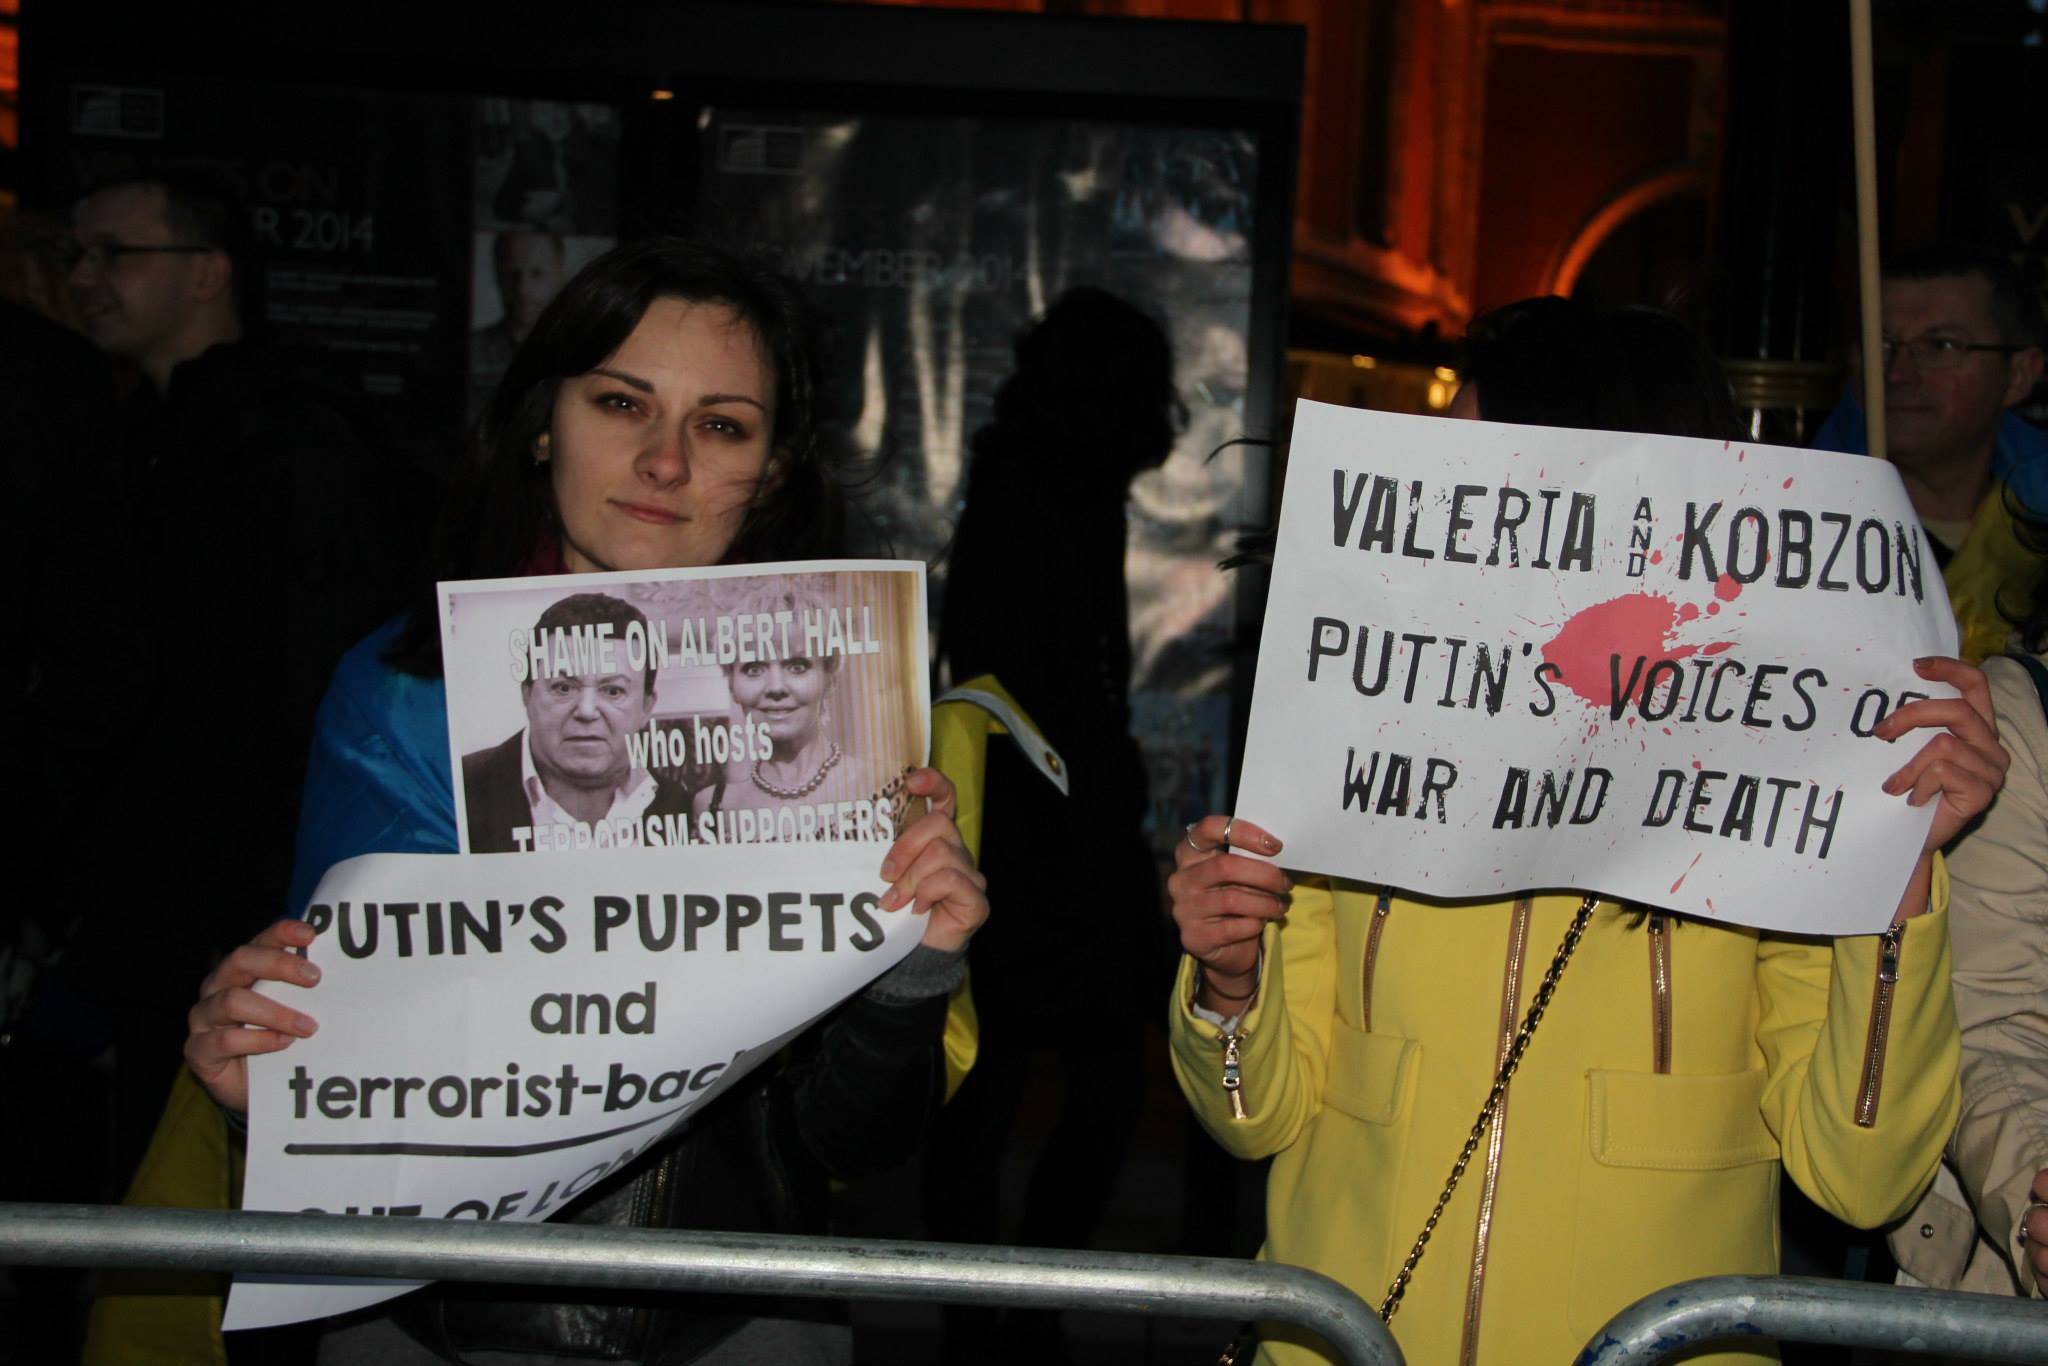 Protest at Royal Albert Hall against Putin’s propagandists and terrorist-backers Kobzon and Valeria ~~